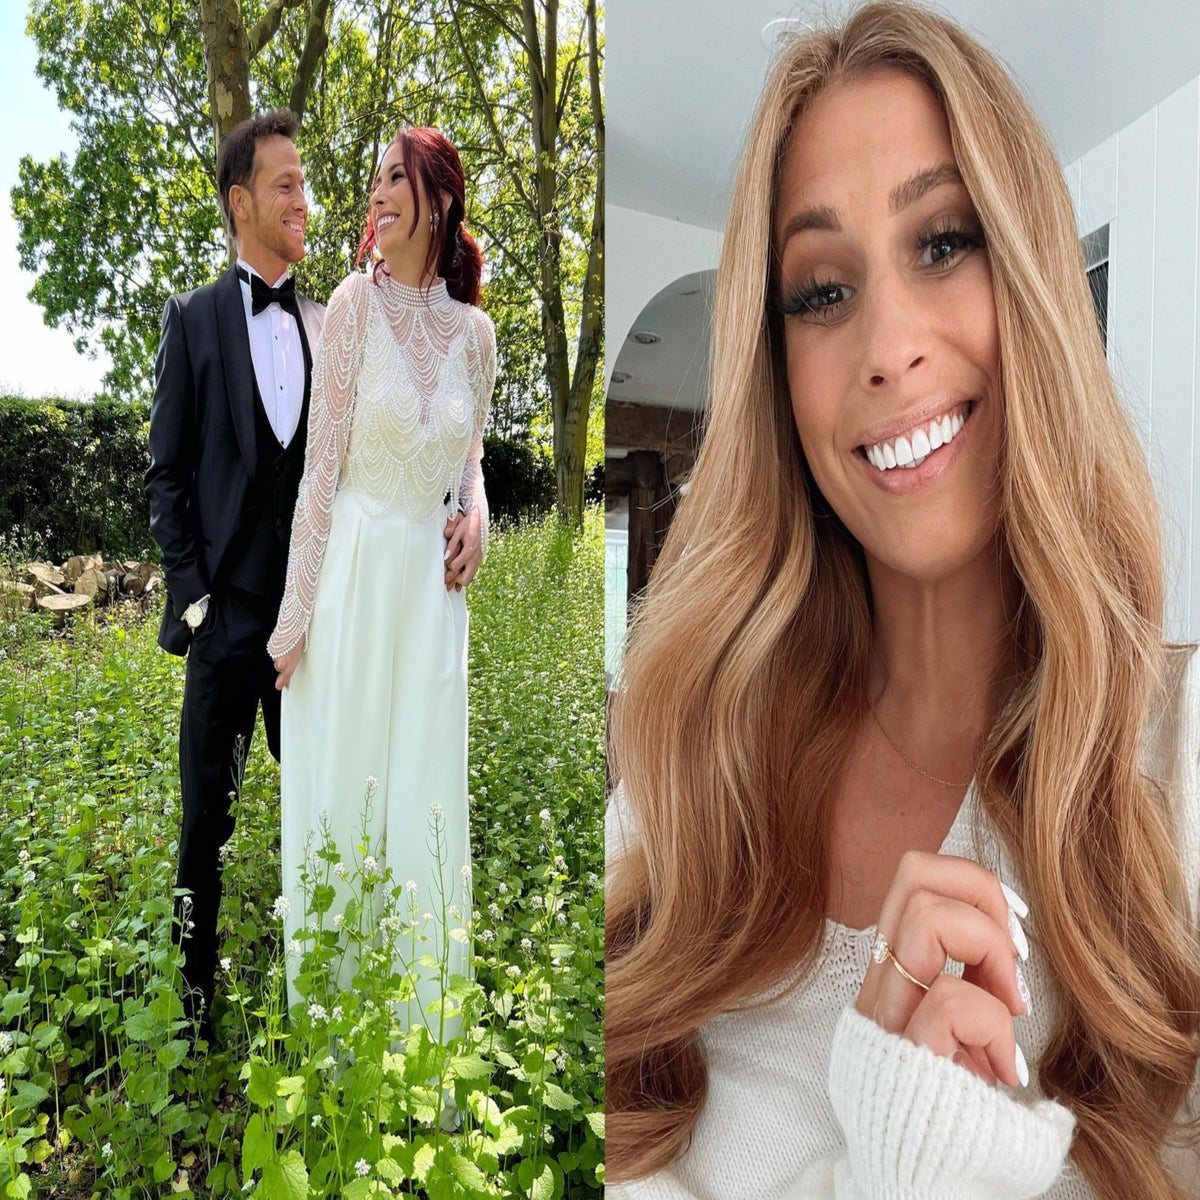 Loose Women's Stacey Solomon shares FIRST LOOK inside wedding to Joe Swash